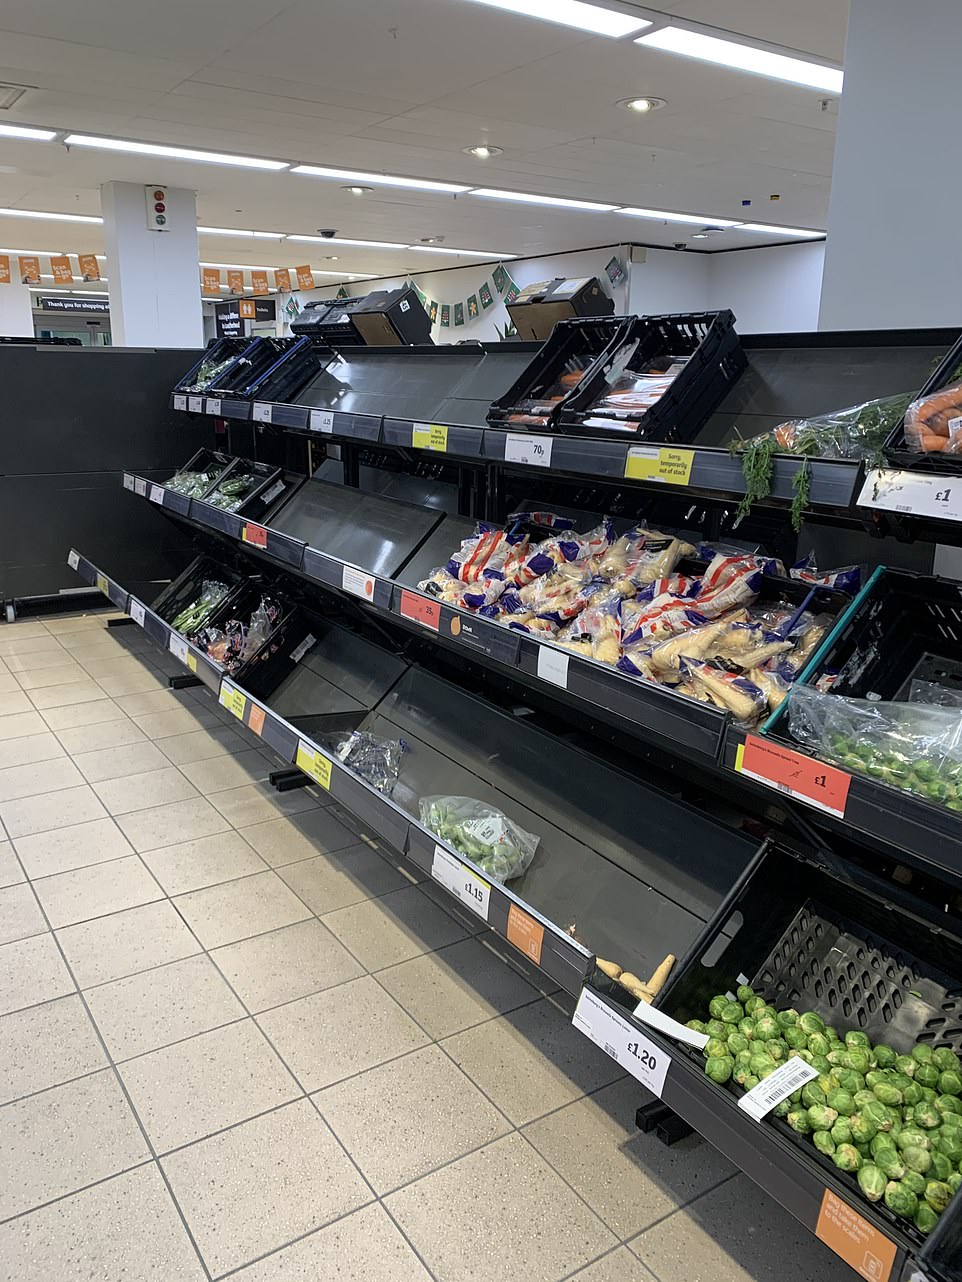 There were empty spaces in the vegetable aisle at this Sainsbury's store amid fears the French travel ban could limit food supply chains